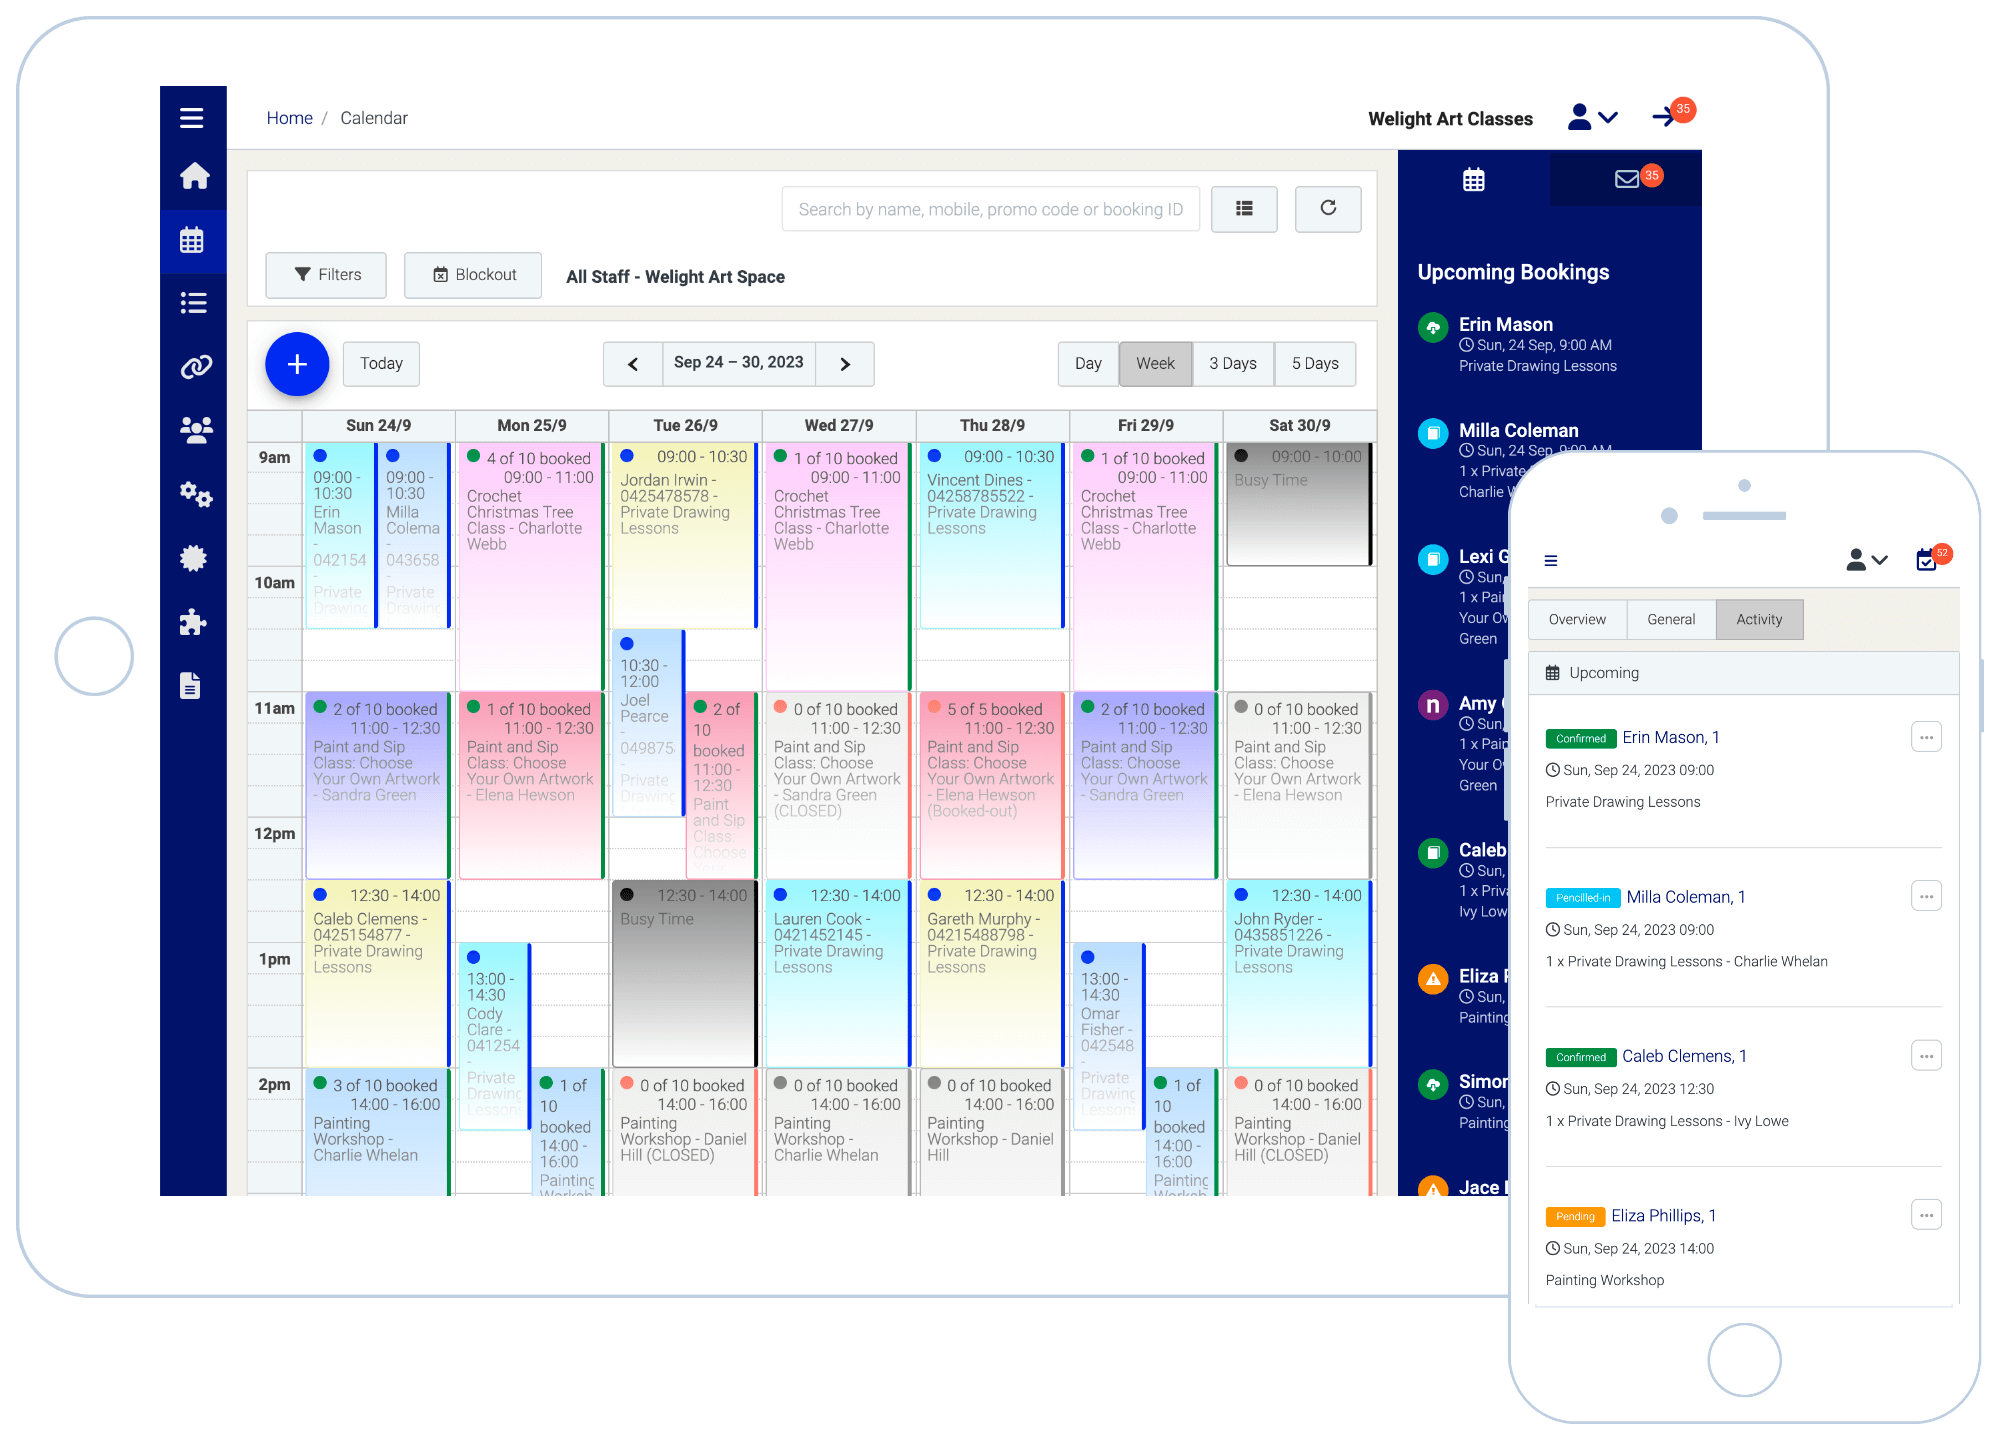 Nabooki booking system calendar and upcoming bookings screenshots on mobile devices